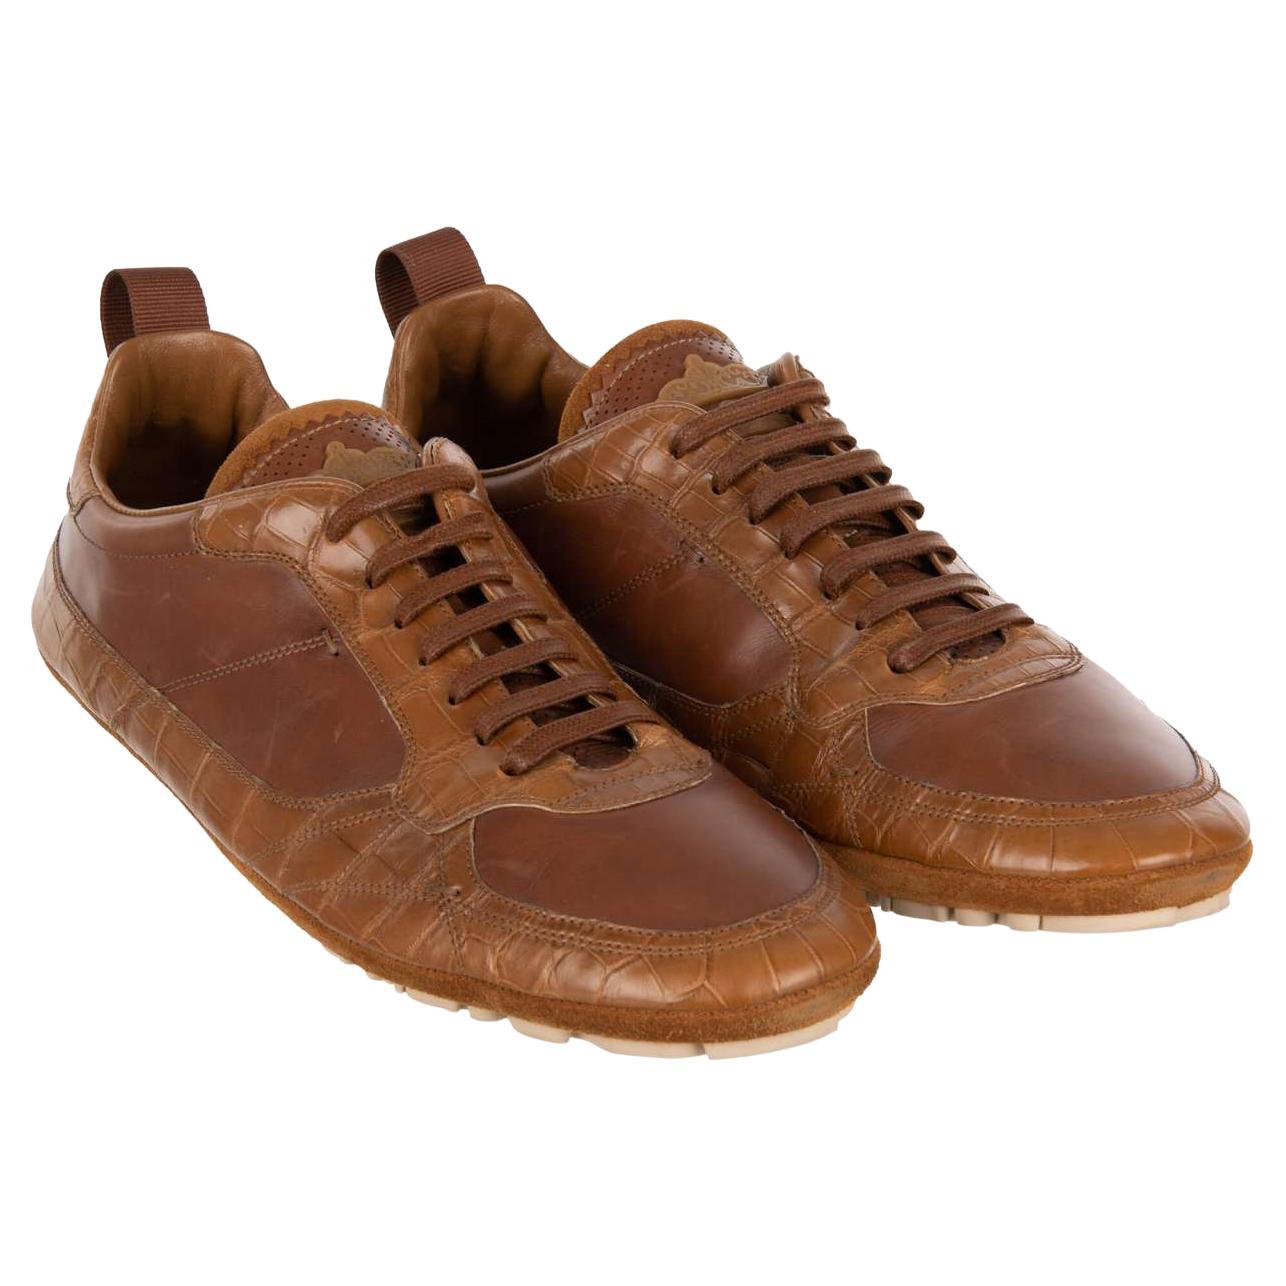 Dolce & Gabbana Low-Top Croco Sneaker KING DRIVER with Crown Brown 44 UK 10 For Sale